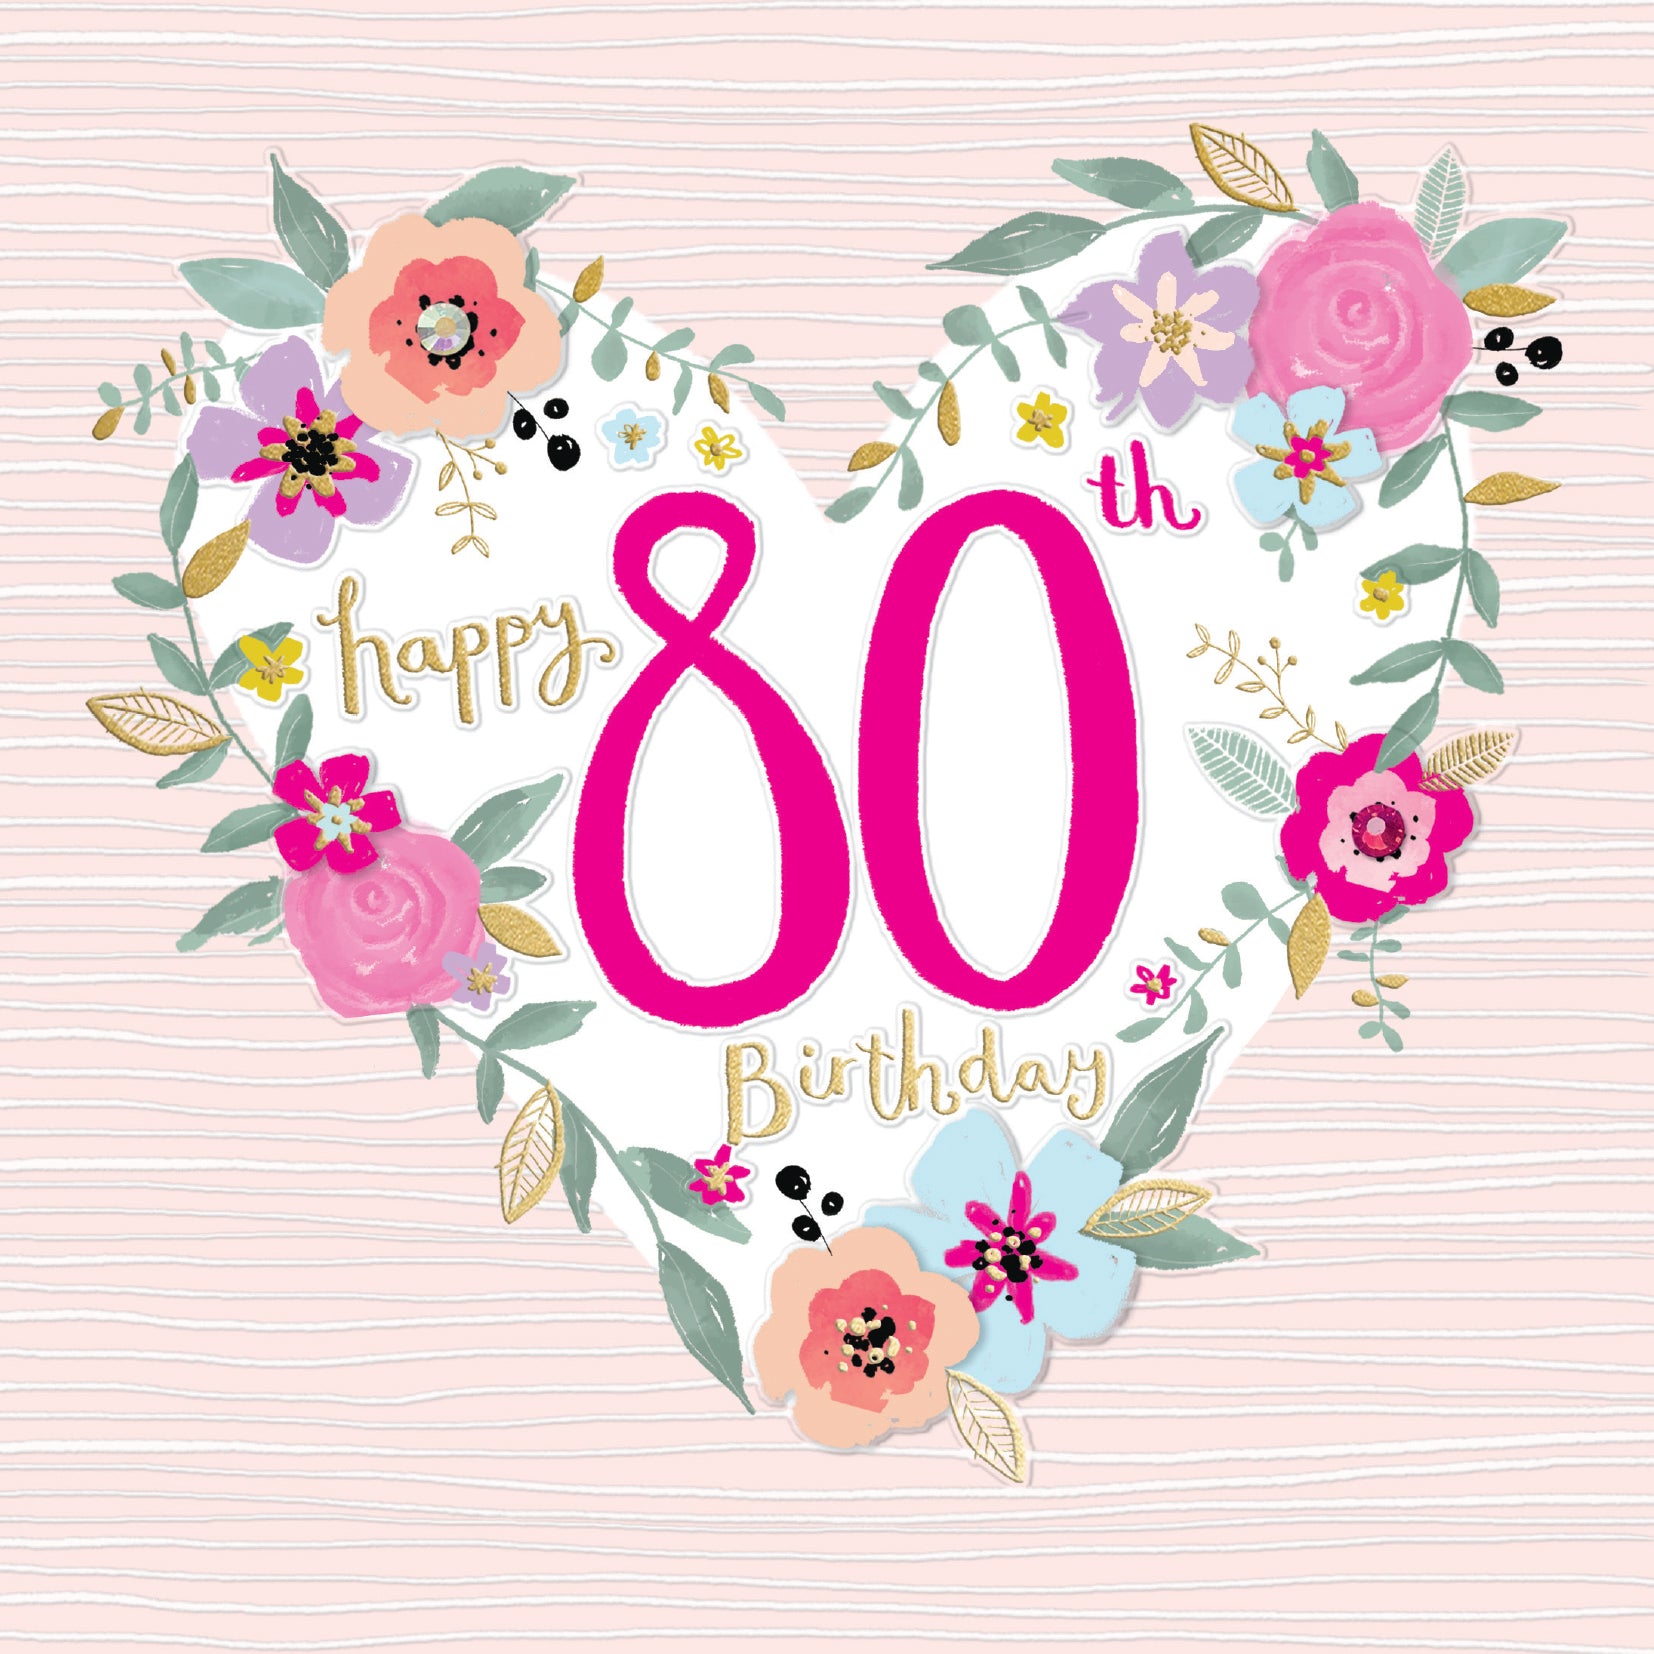 Floral Heart 80th Birthday Card from Penny Black